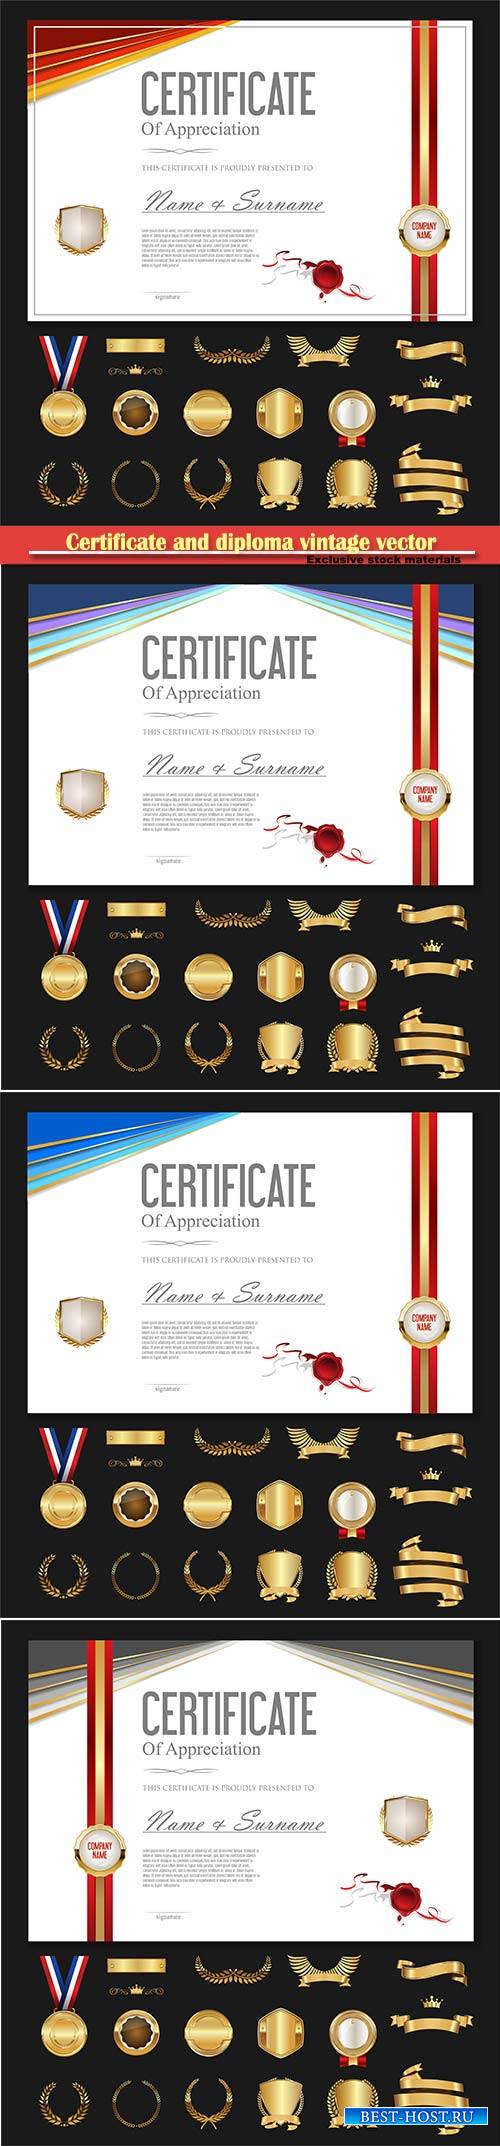 Certificate and diploma vintage vector temlate with luxury labels